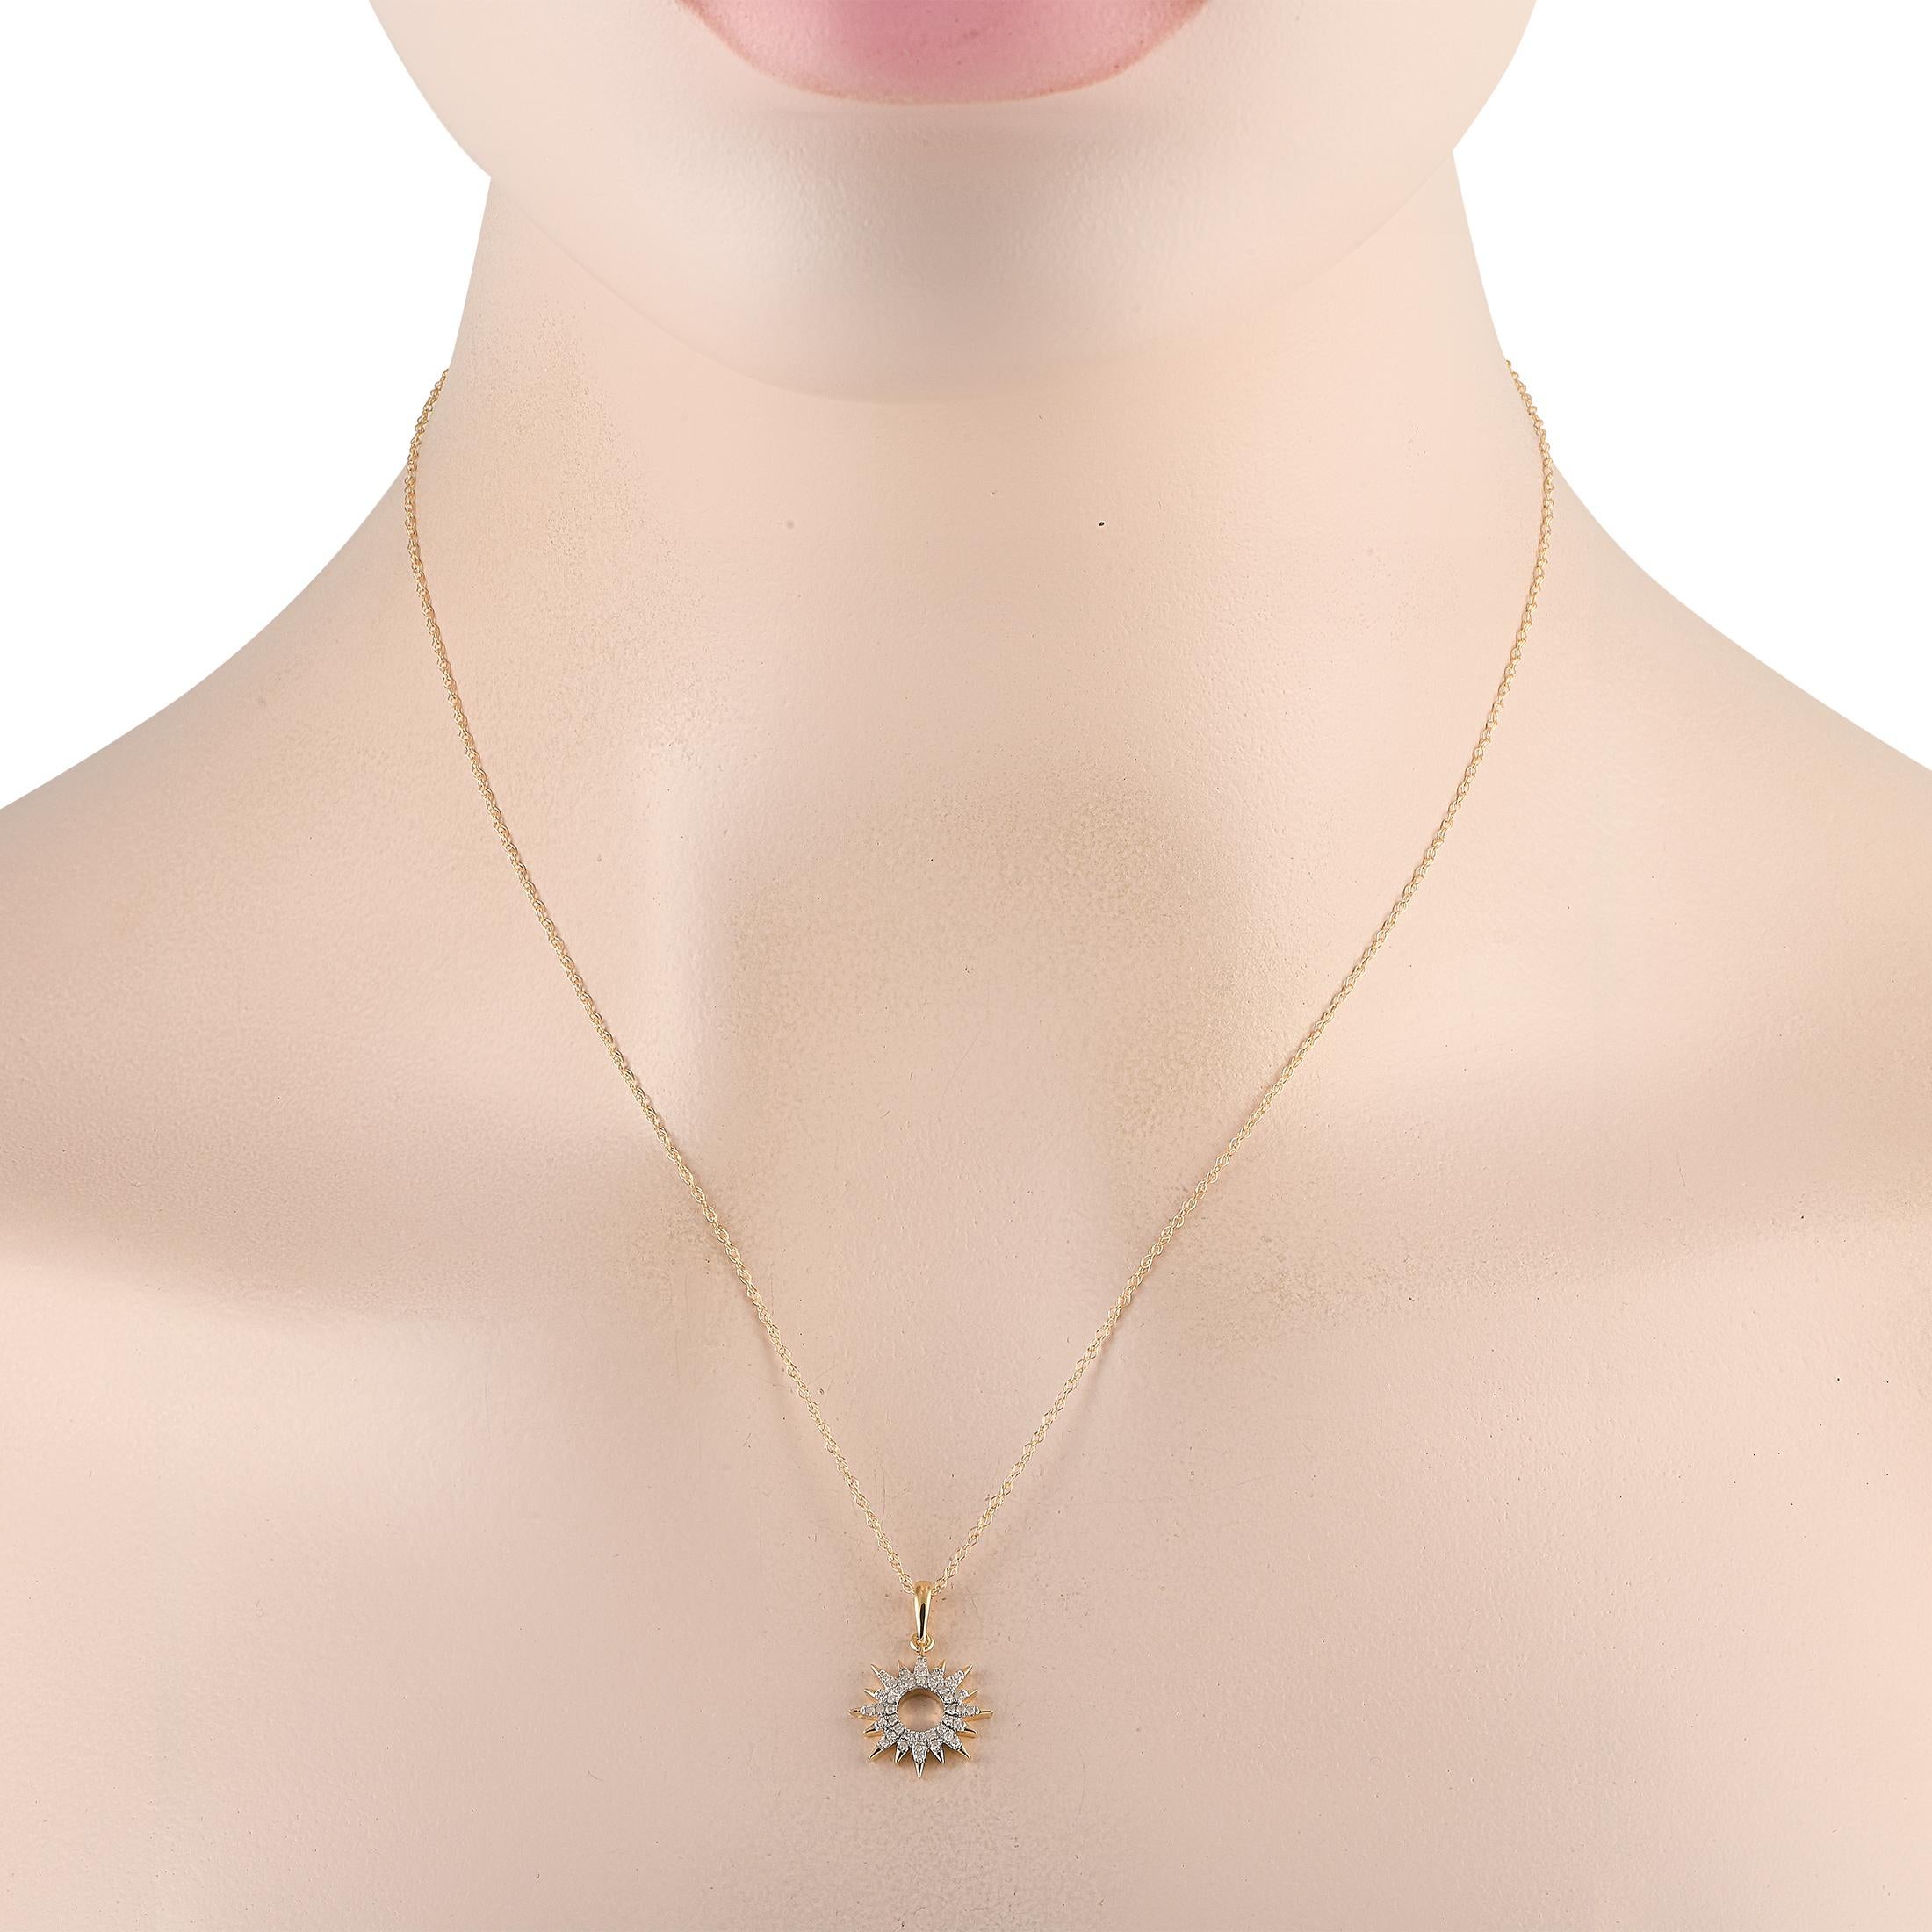 The radiant beauty of this diamond necklace can elevate a casual look and polish a dressy outfit. This necklace features a ring of glitter, with prong-set round diamonds arranged in a sunray pattern. Polished yellow gold triangle points punctuate